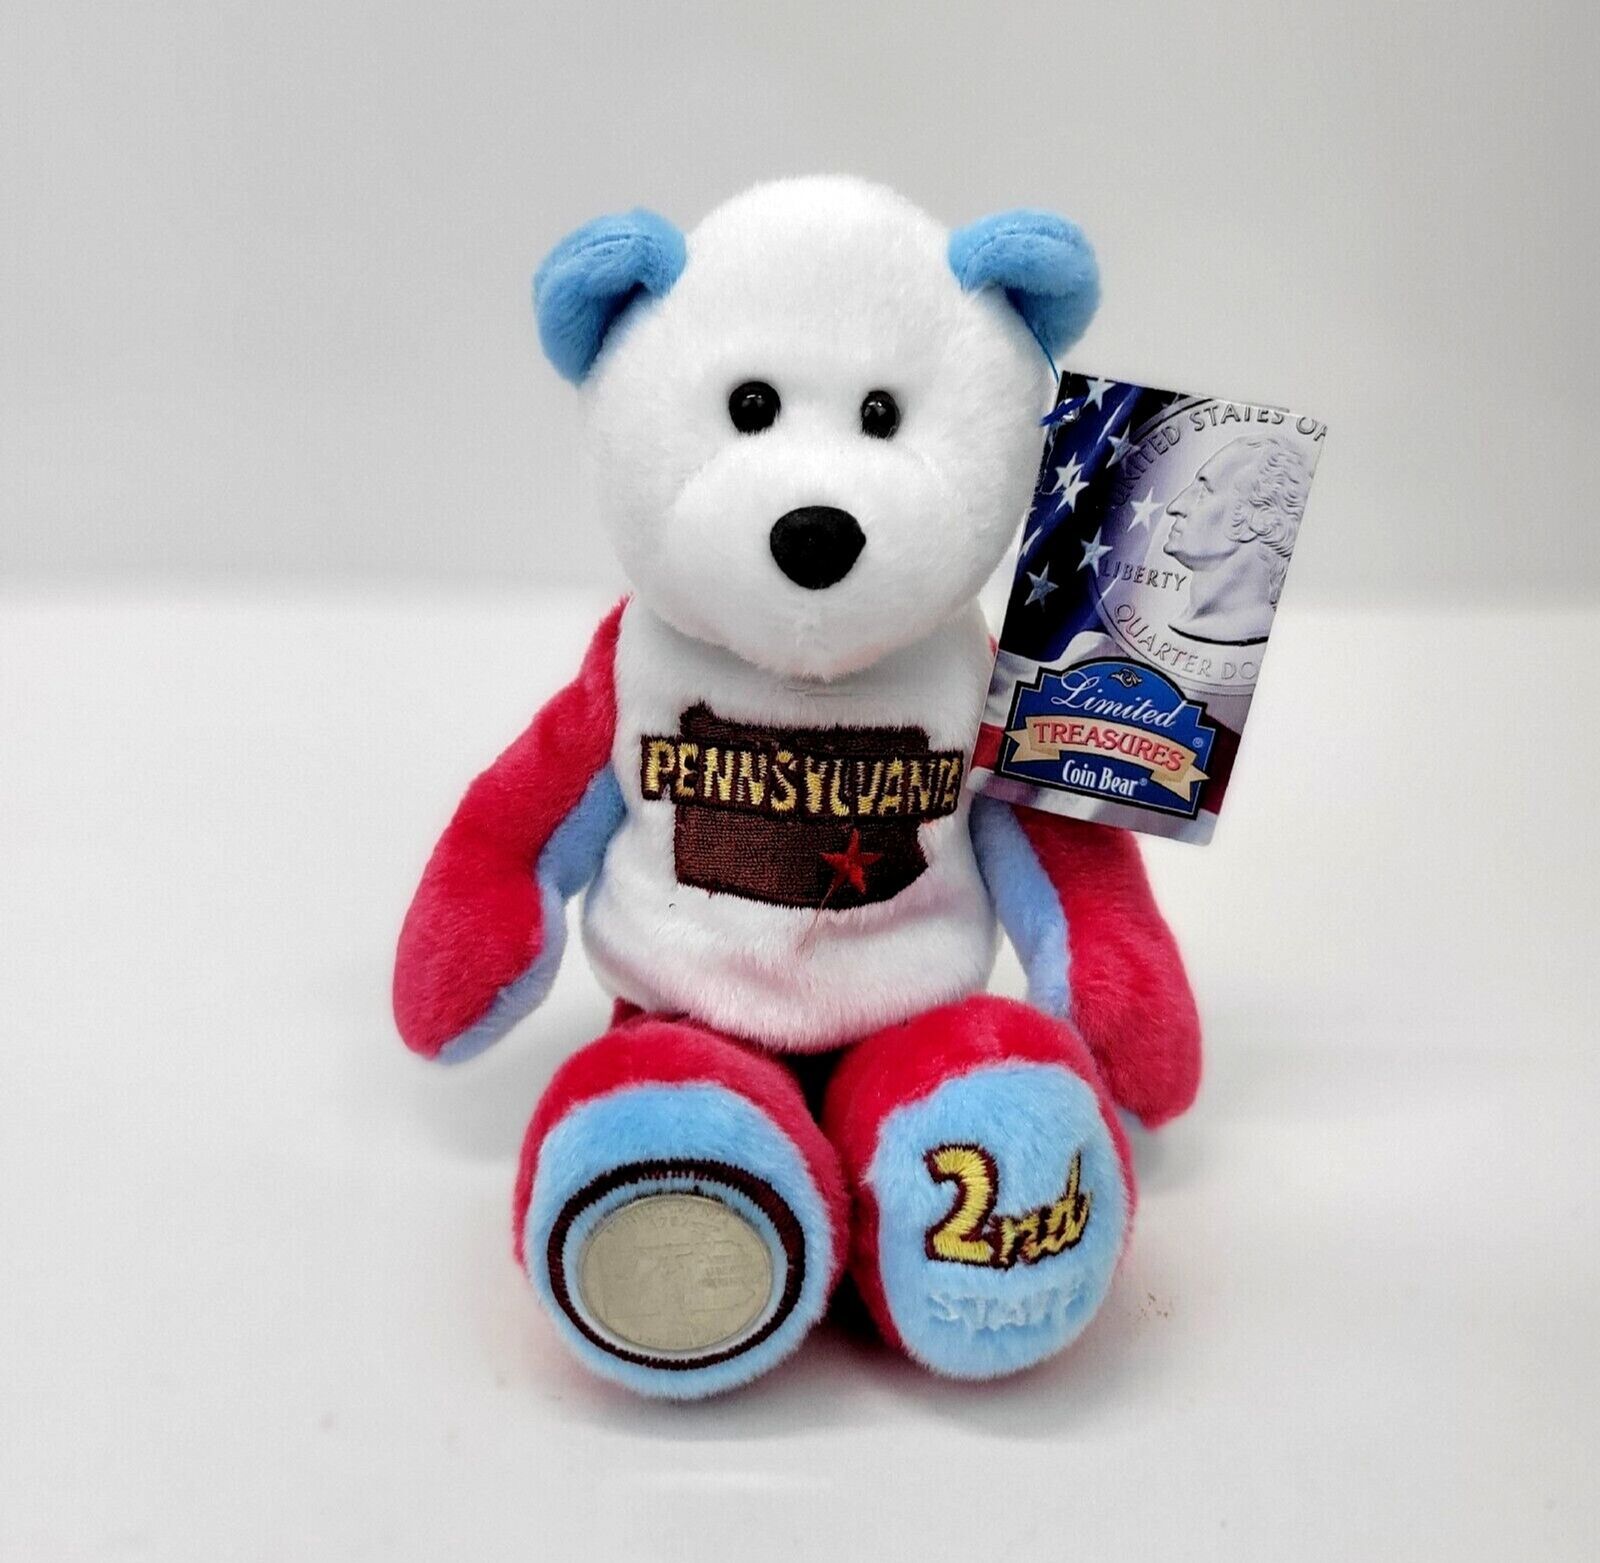 Pennsylvania Quarter Bear 2nd State Limited Treasures Coin Bear Set NEW w/Tag 9" - $7.97